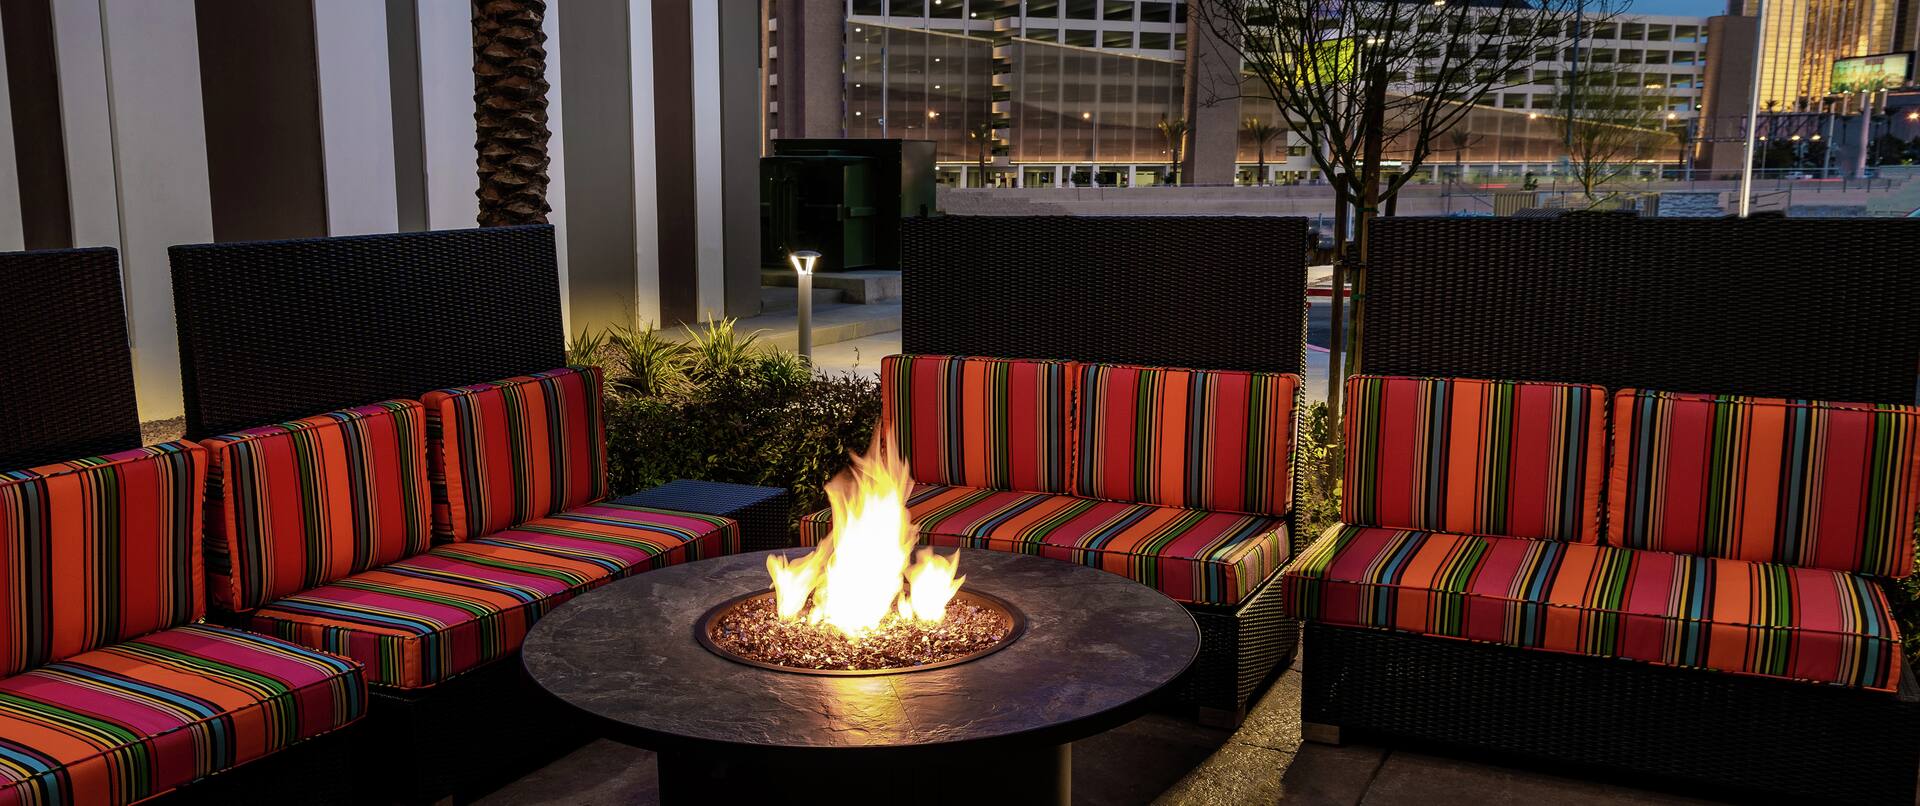 Patio Seating and Fire Pit